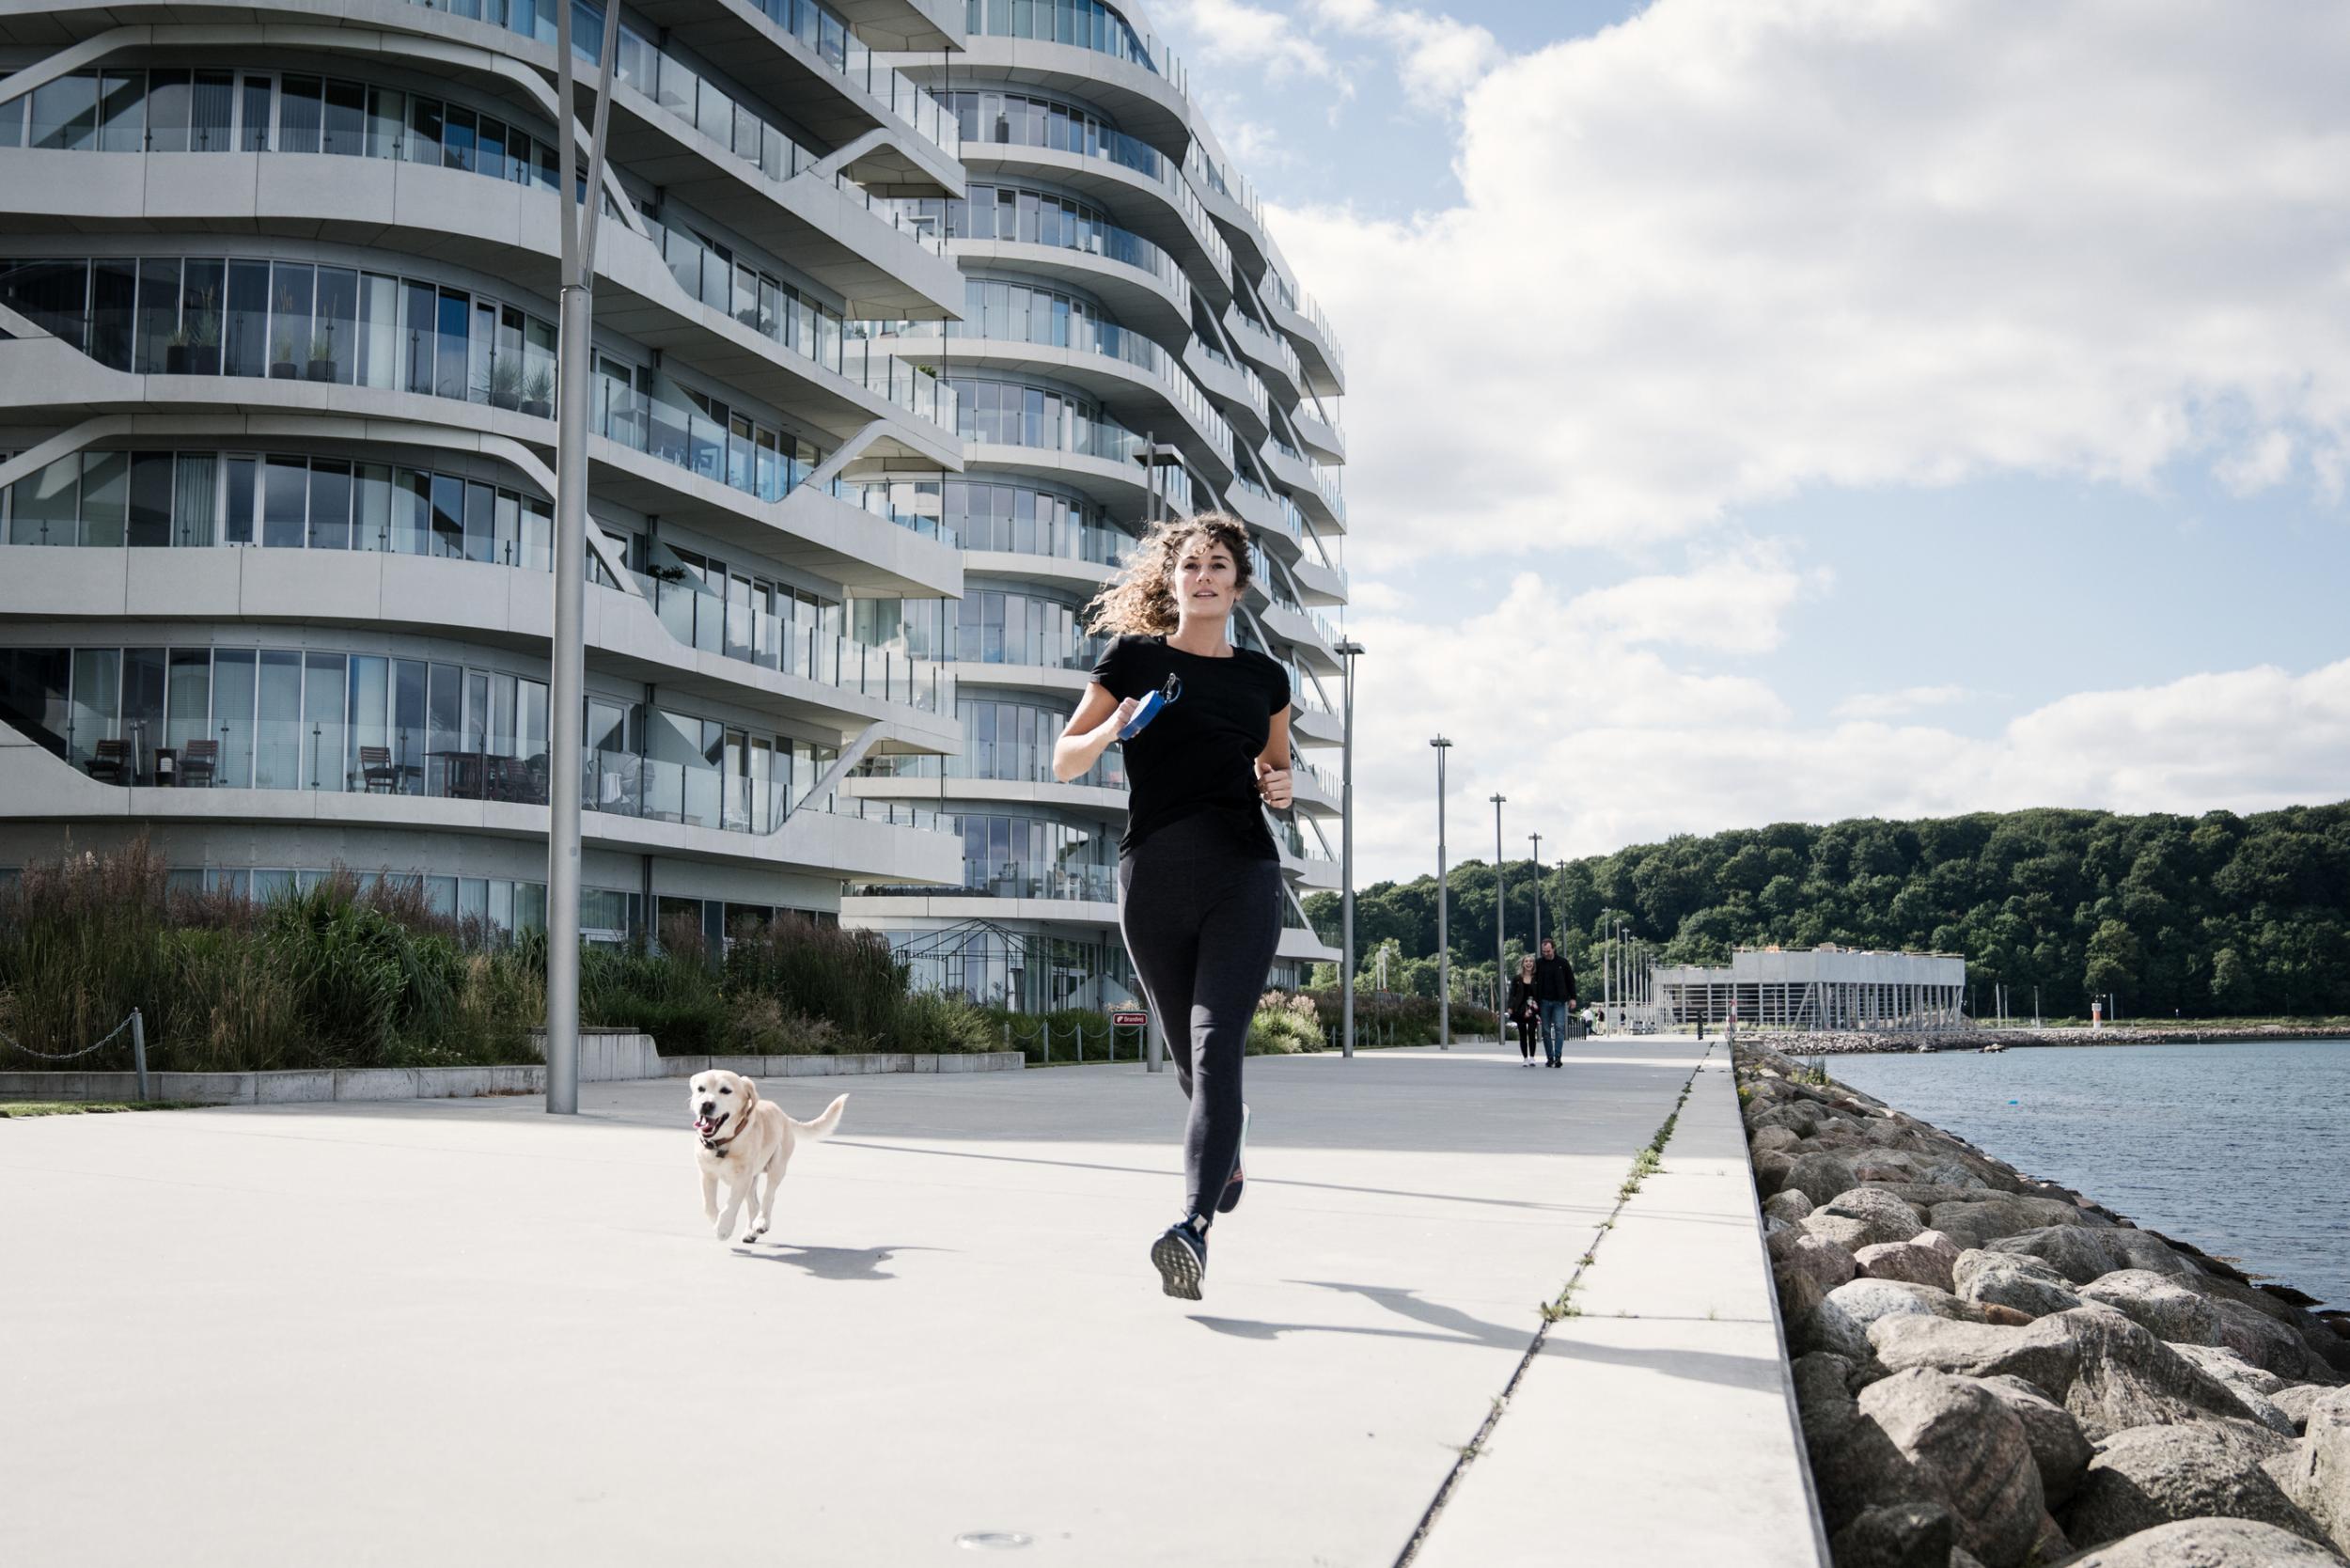 Aarhus Ø is a striking district located right by the water